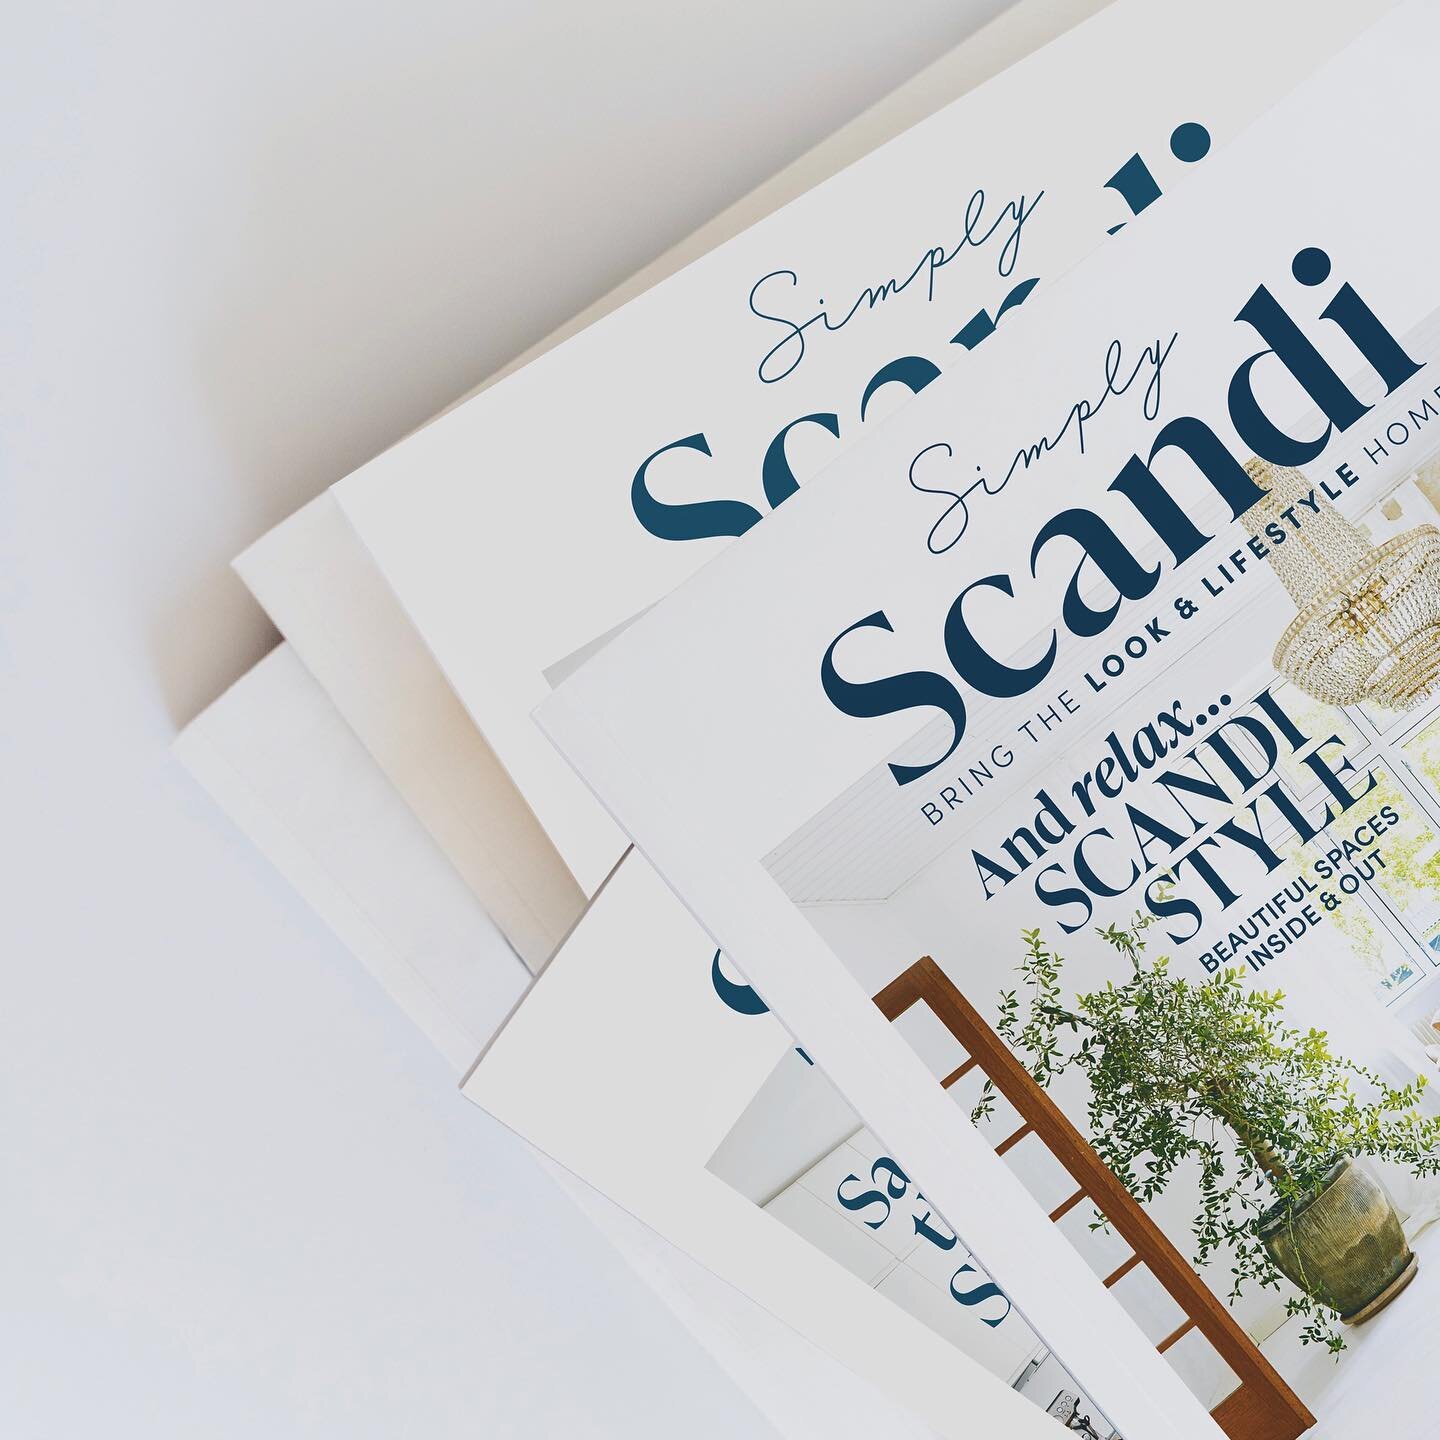 The 10th issue of @simplyscandimag is on sale today 🎉 and it&rsquo;s a stunning summer issue.

Congratulations and a huge thank you to @theformereditor for making it happen - who had a dream, was a little bit petrified 😅, and went for it!

Here&rsq